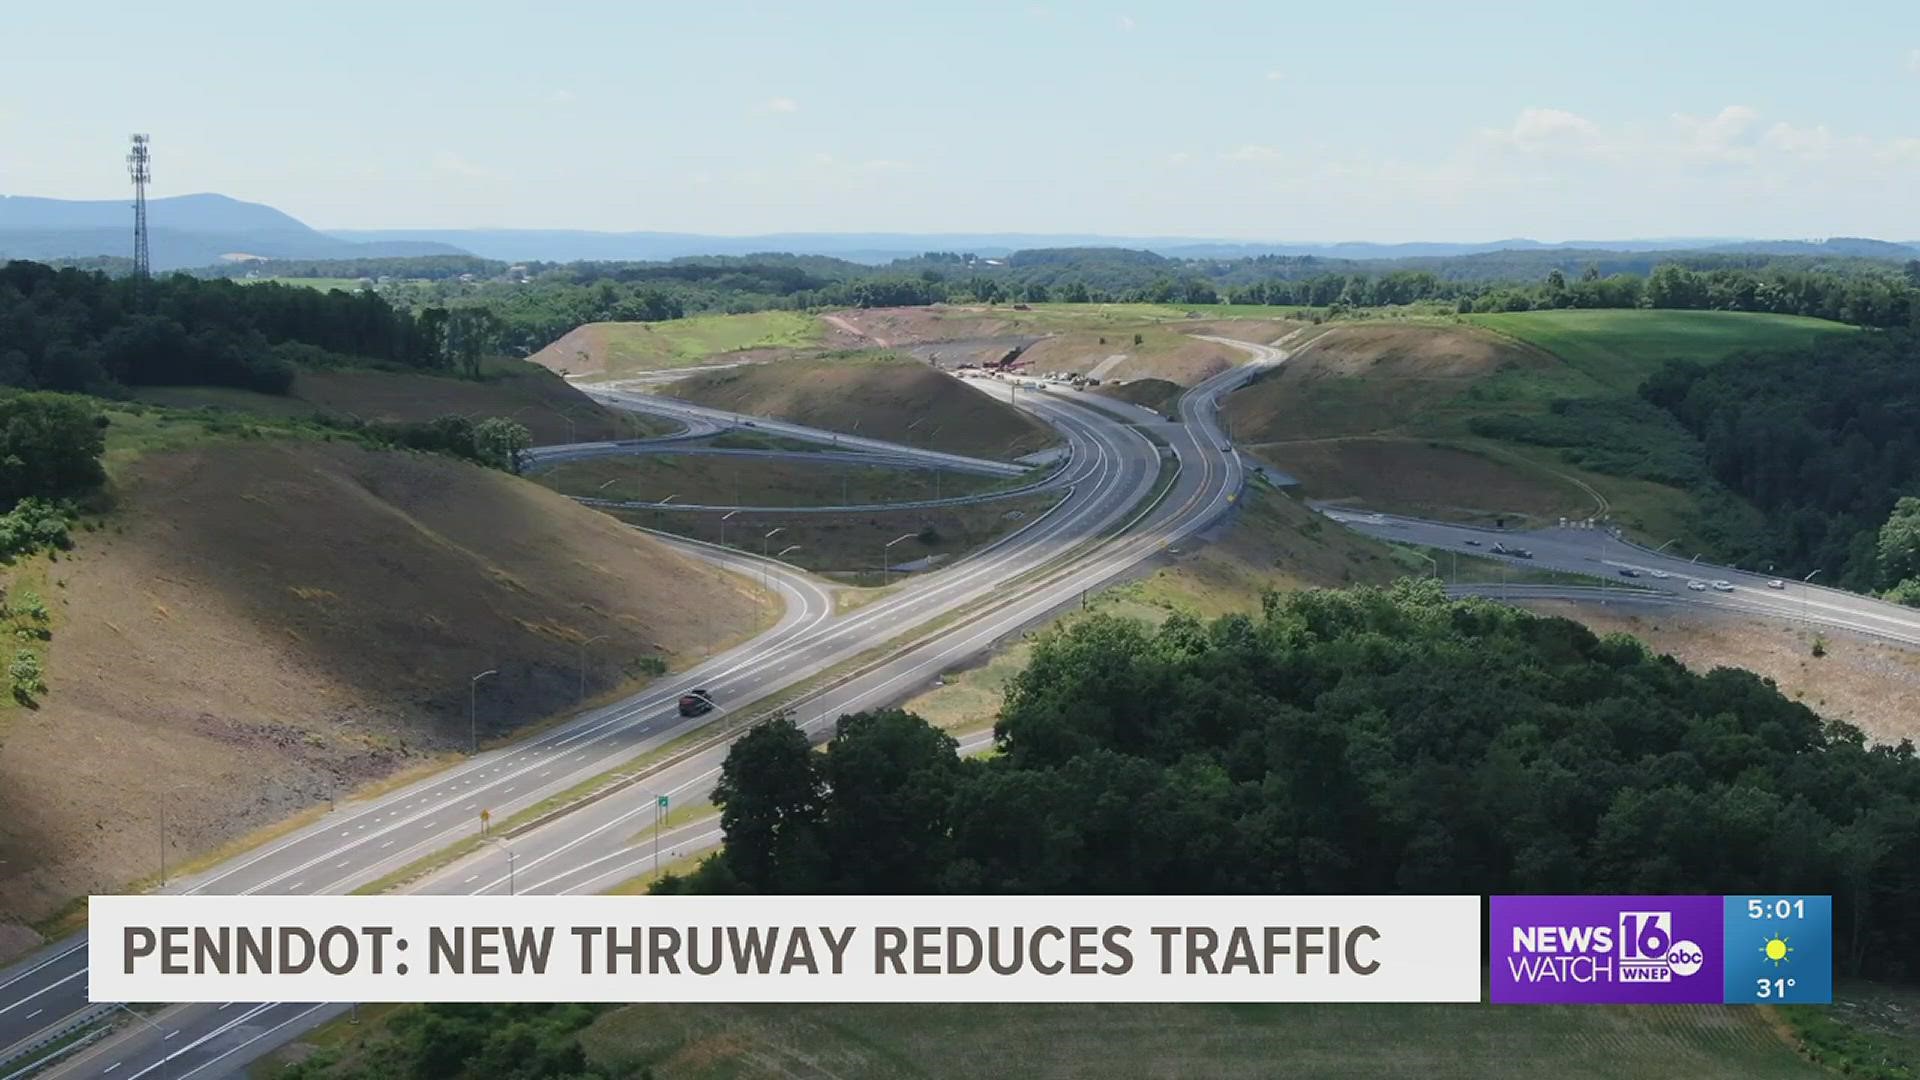 This week, PennDOT released a study saying the new thruway in central PA has reduced traffic in both Lewisburg and Northumberland.